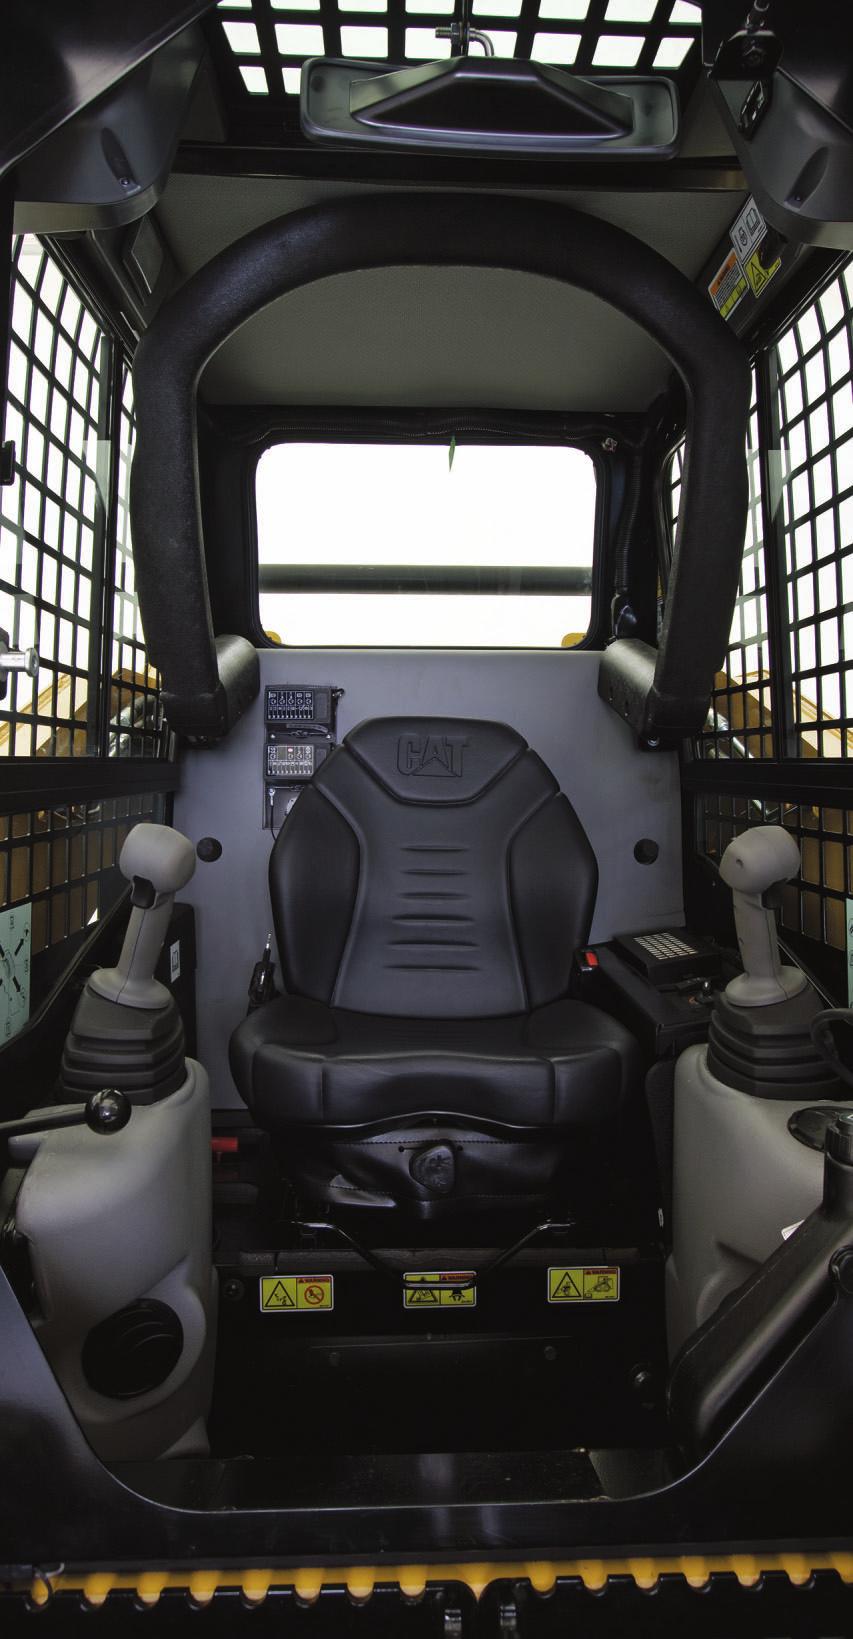 Operator Station Superior comfort to keep you productive throughout the work day. All Day Comfort Comfort and ease of operation have been designed into every aspect of the operator station.